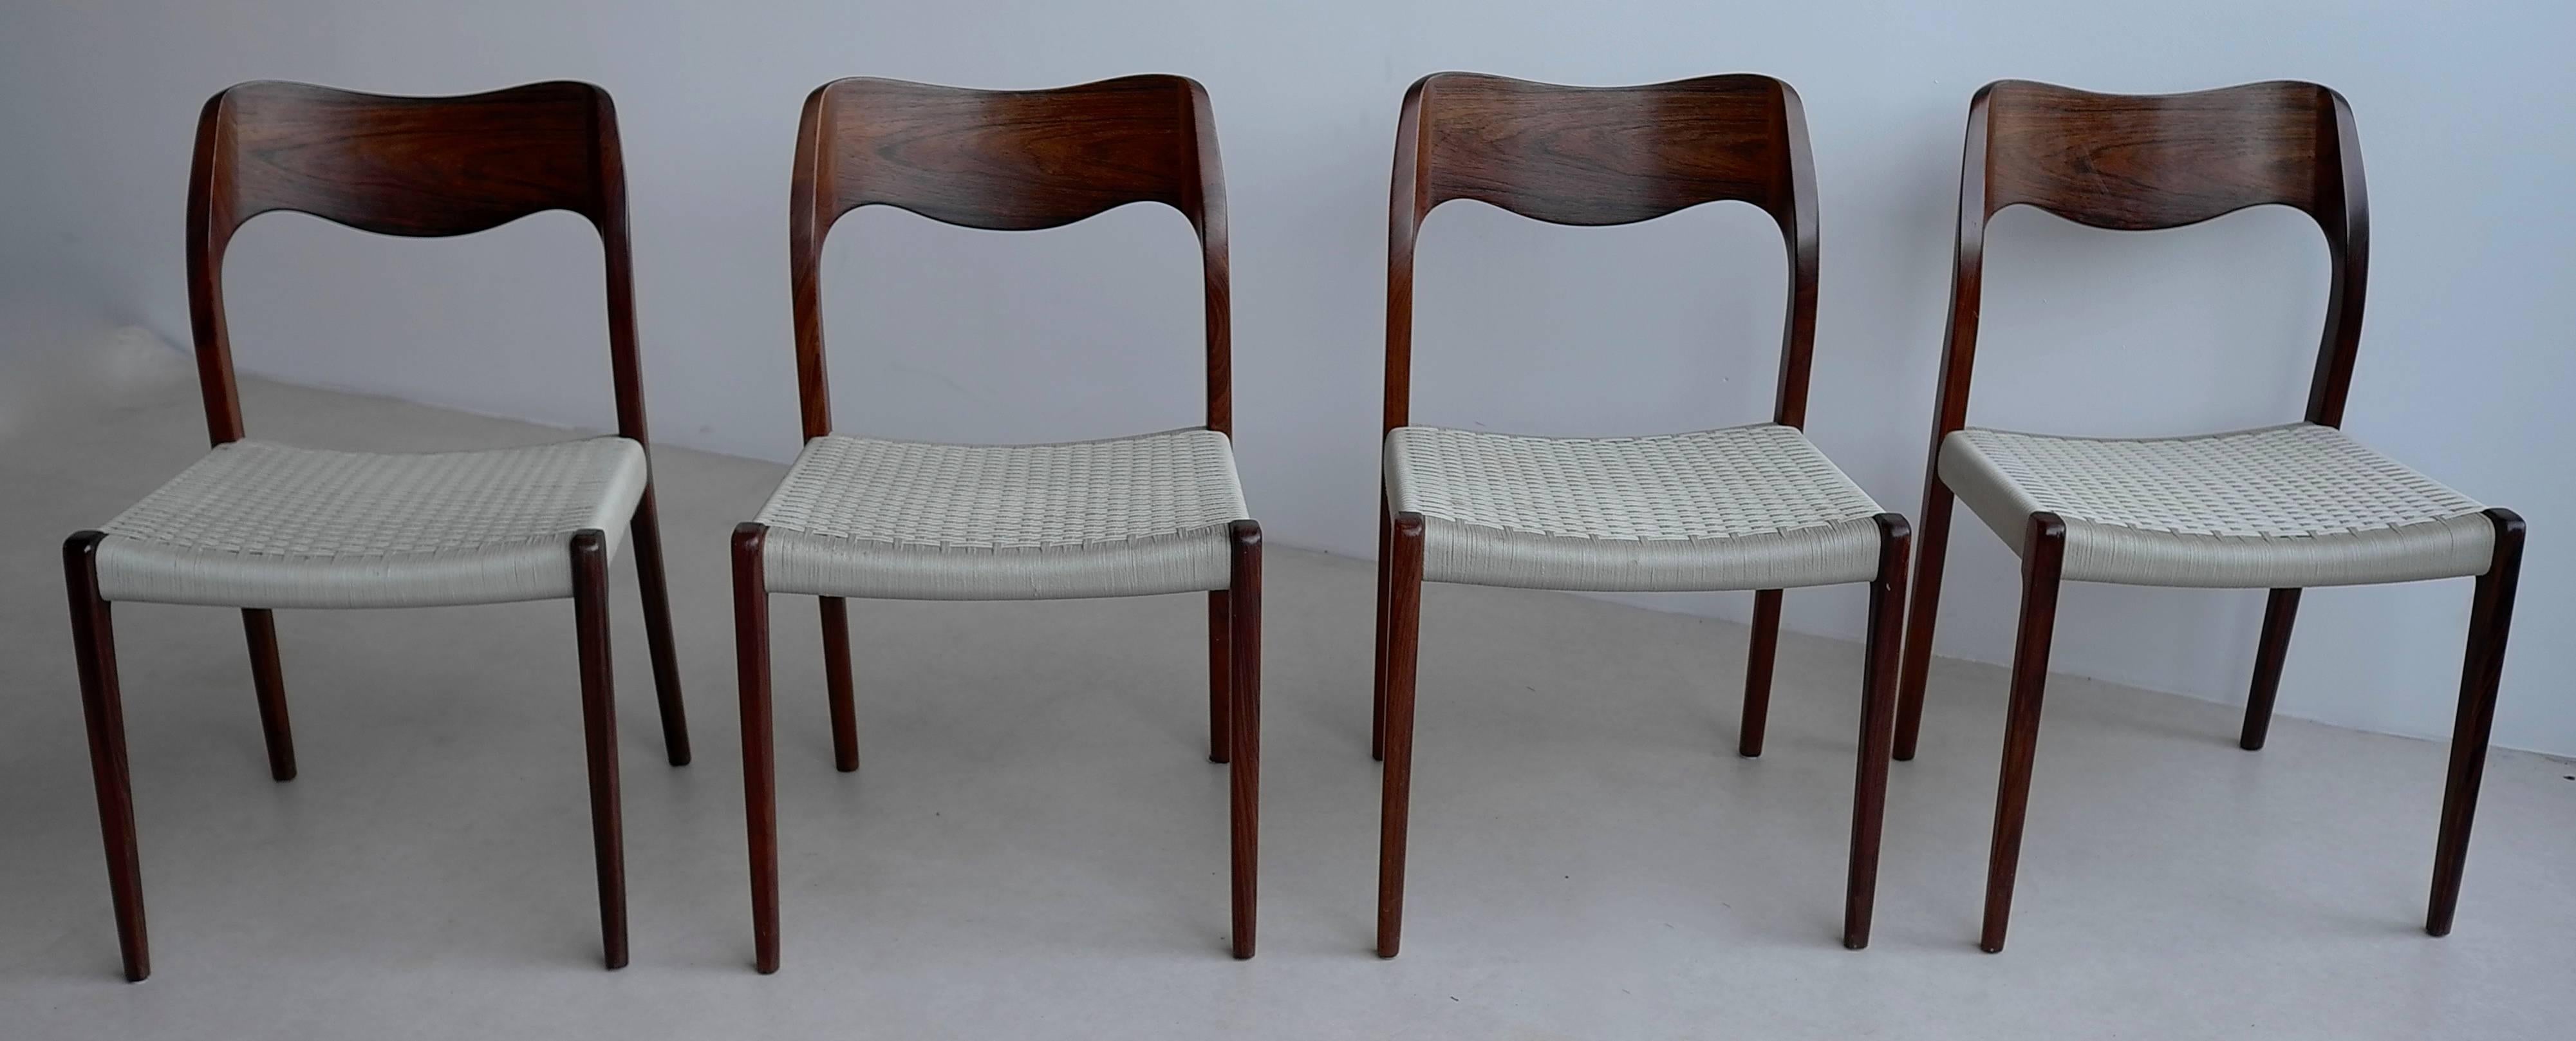 Rosewood chairs by Niels Otto Moller no 71, Denmark, 1960s.